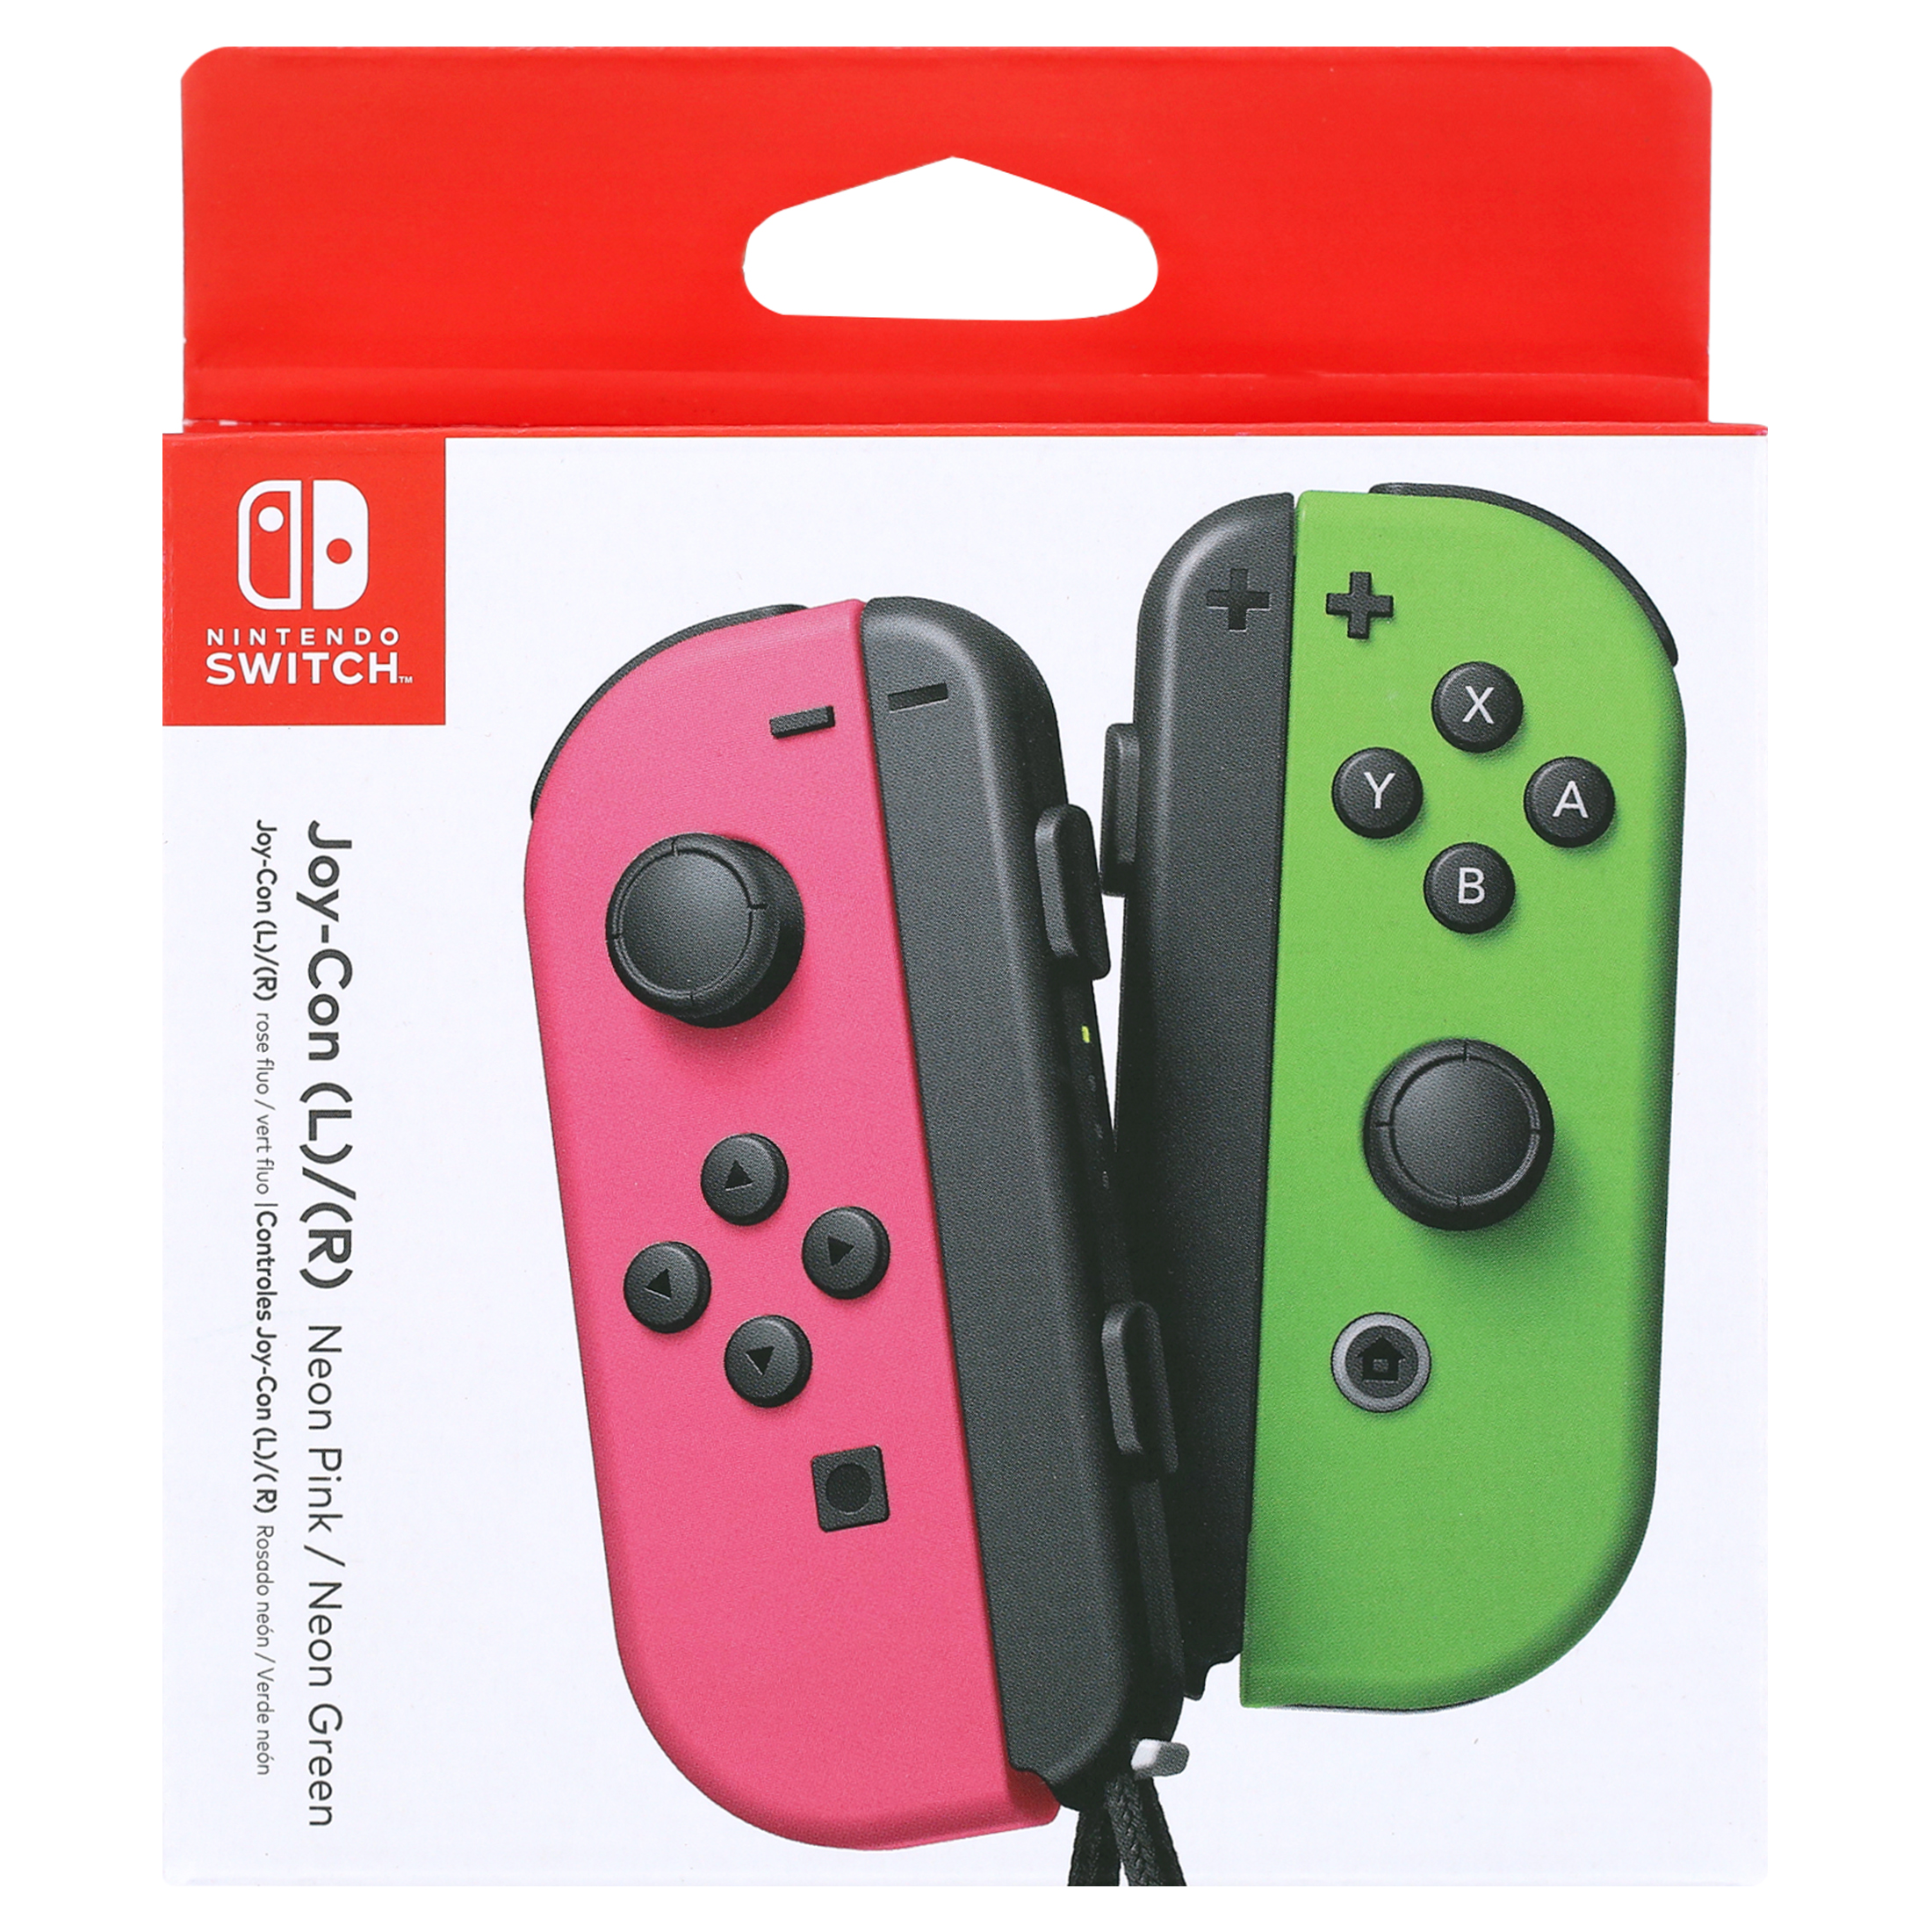 Nintendo Switch Joy-Con Pair, Neon Pink and Neon Green - image 1 of 6